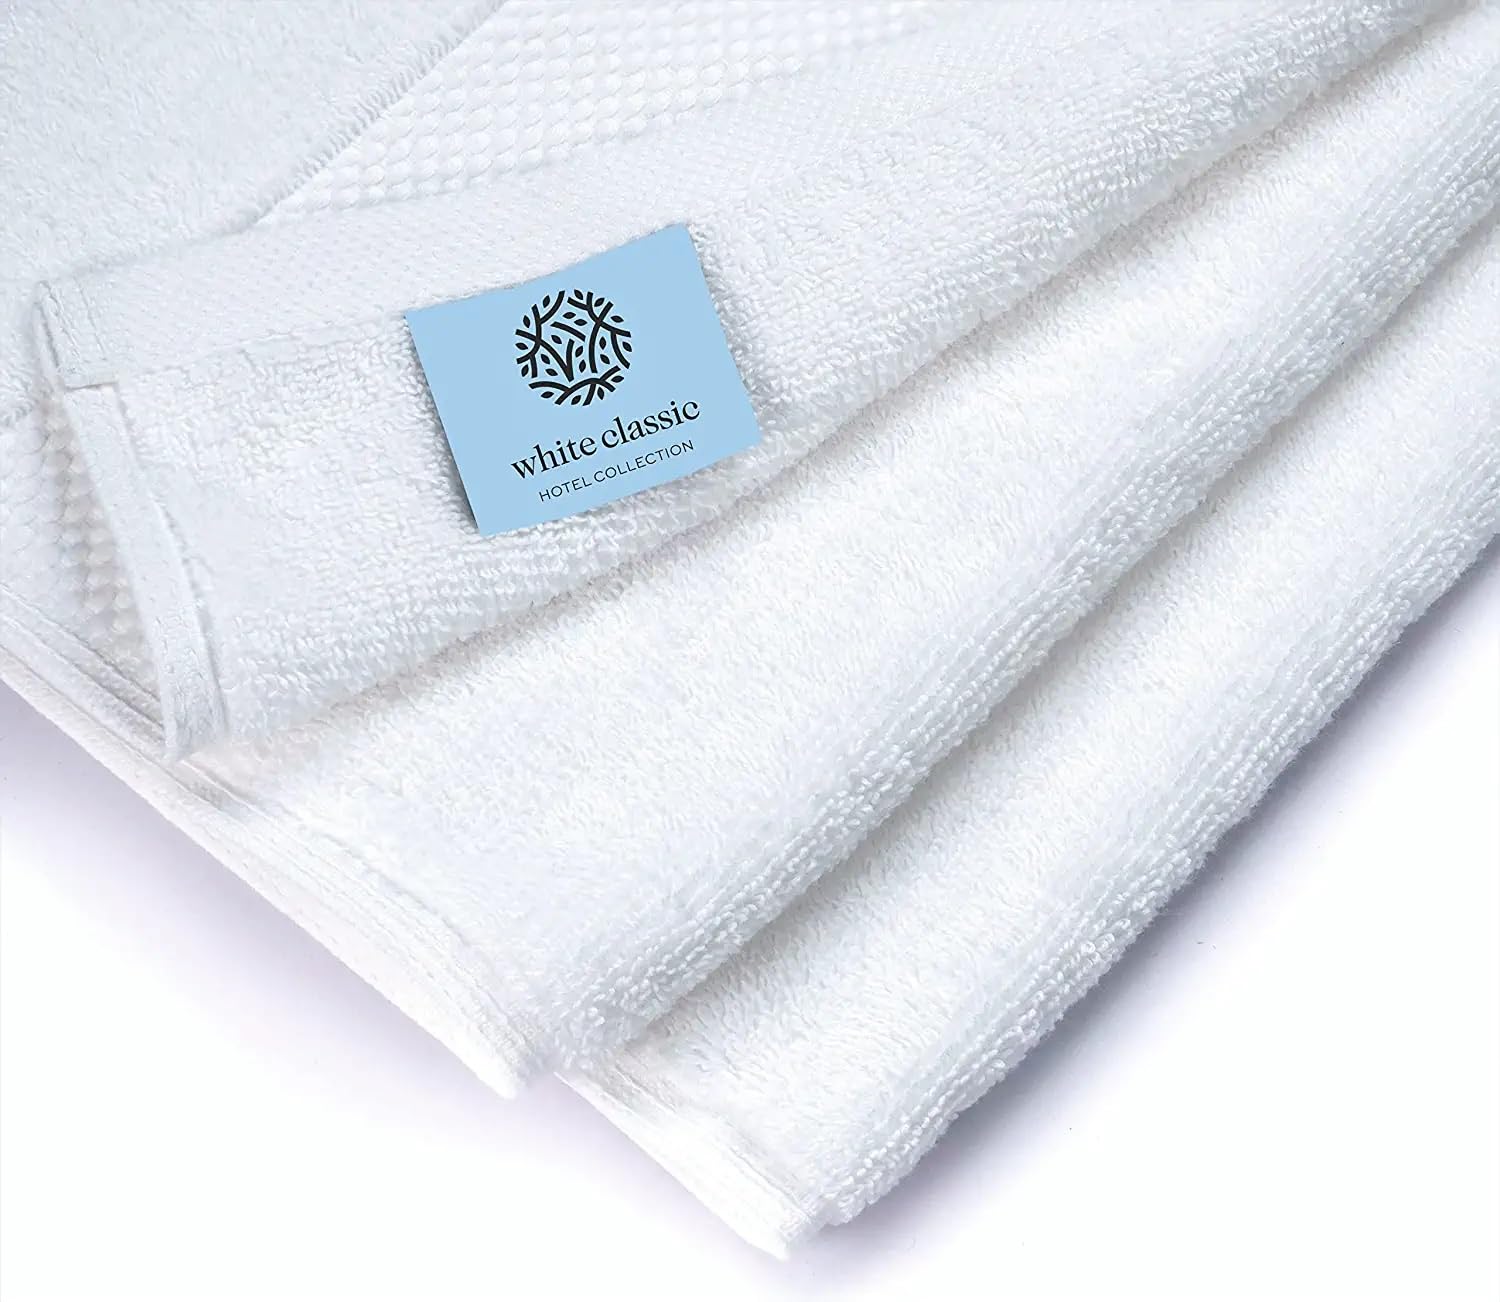 Luxury 8 Piece Bath Towel Set White - 700 GSM Thick Combed Cotton Hotel Quality Towels - 2 Bath Towels, 2 Hand Towels, 4 Washcloths  - Acceptable